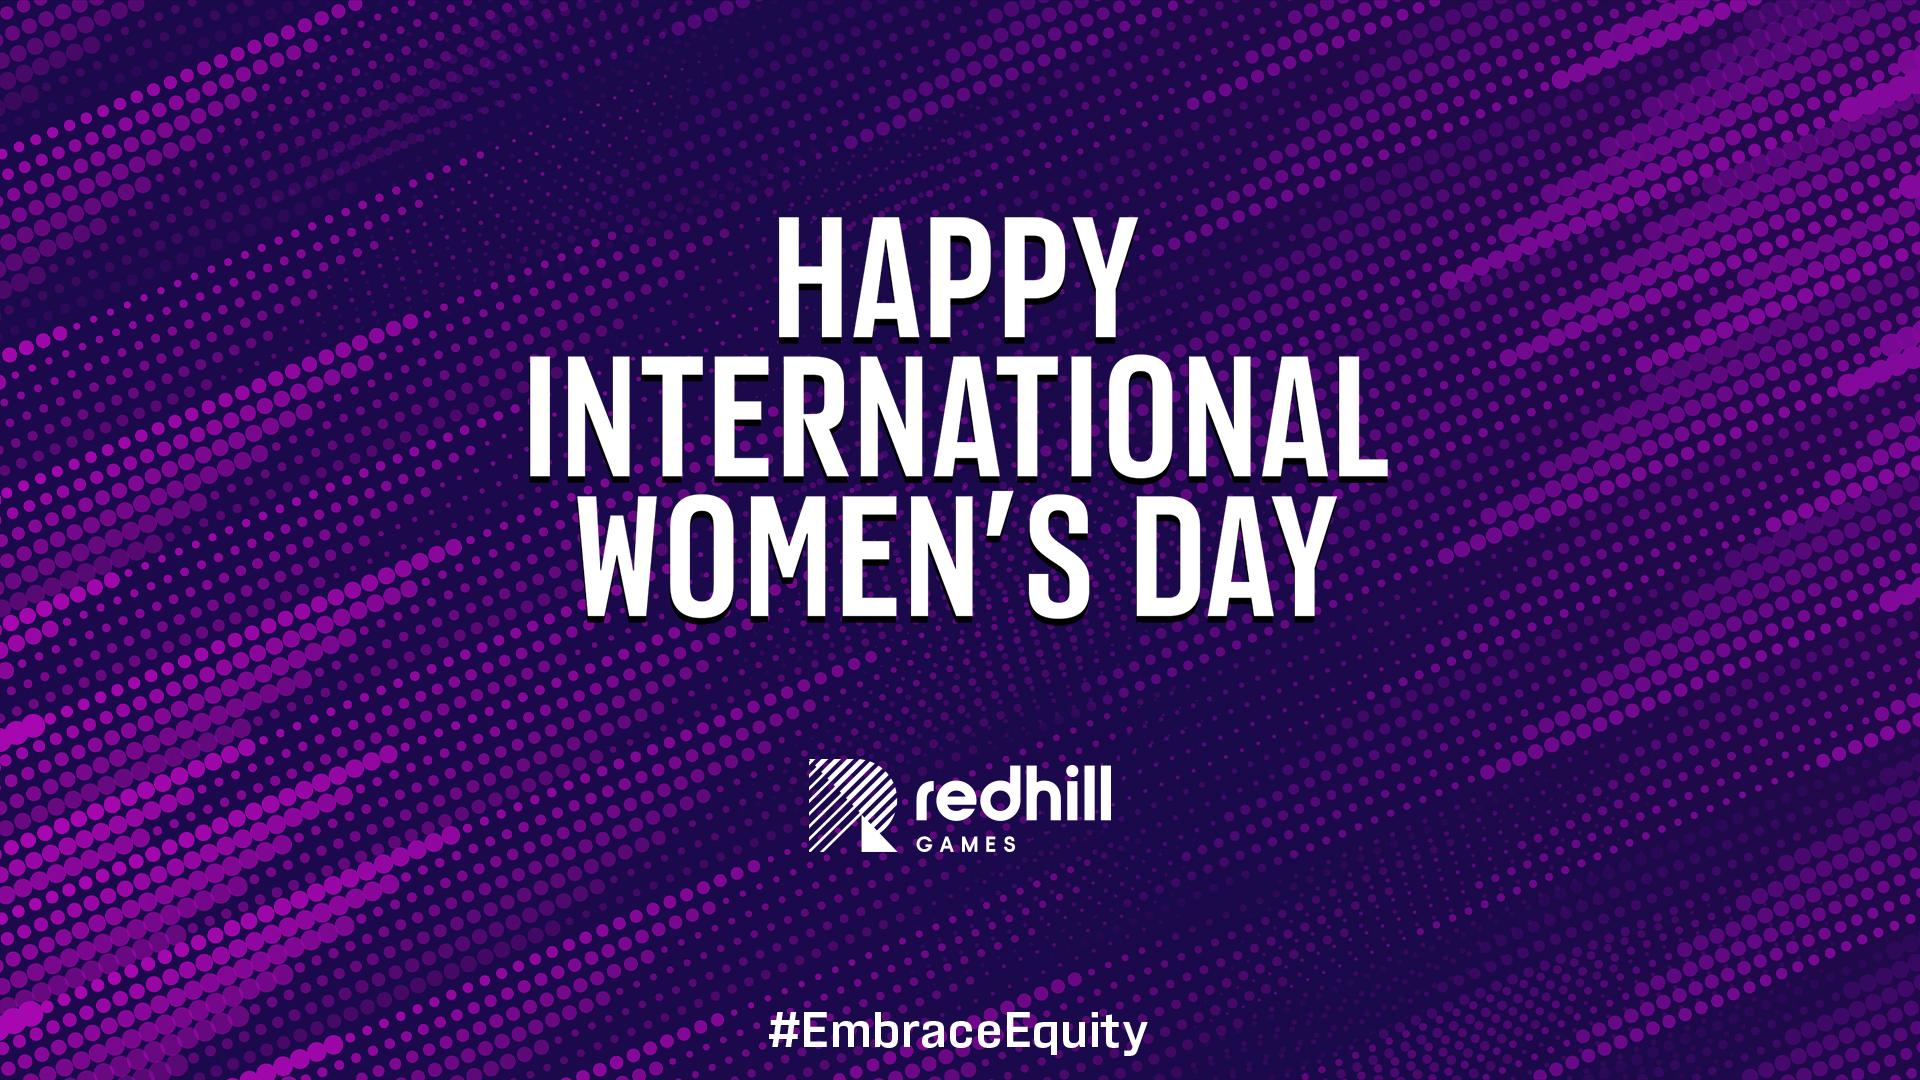 happy international women's day from redhill games! Embrace Equity!